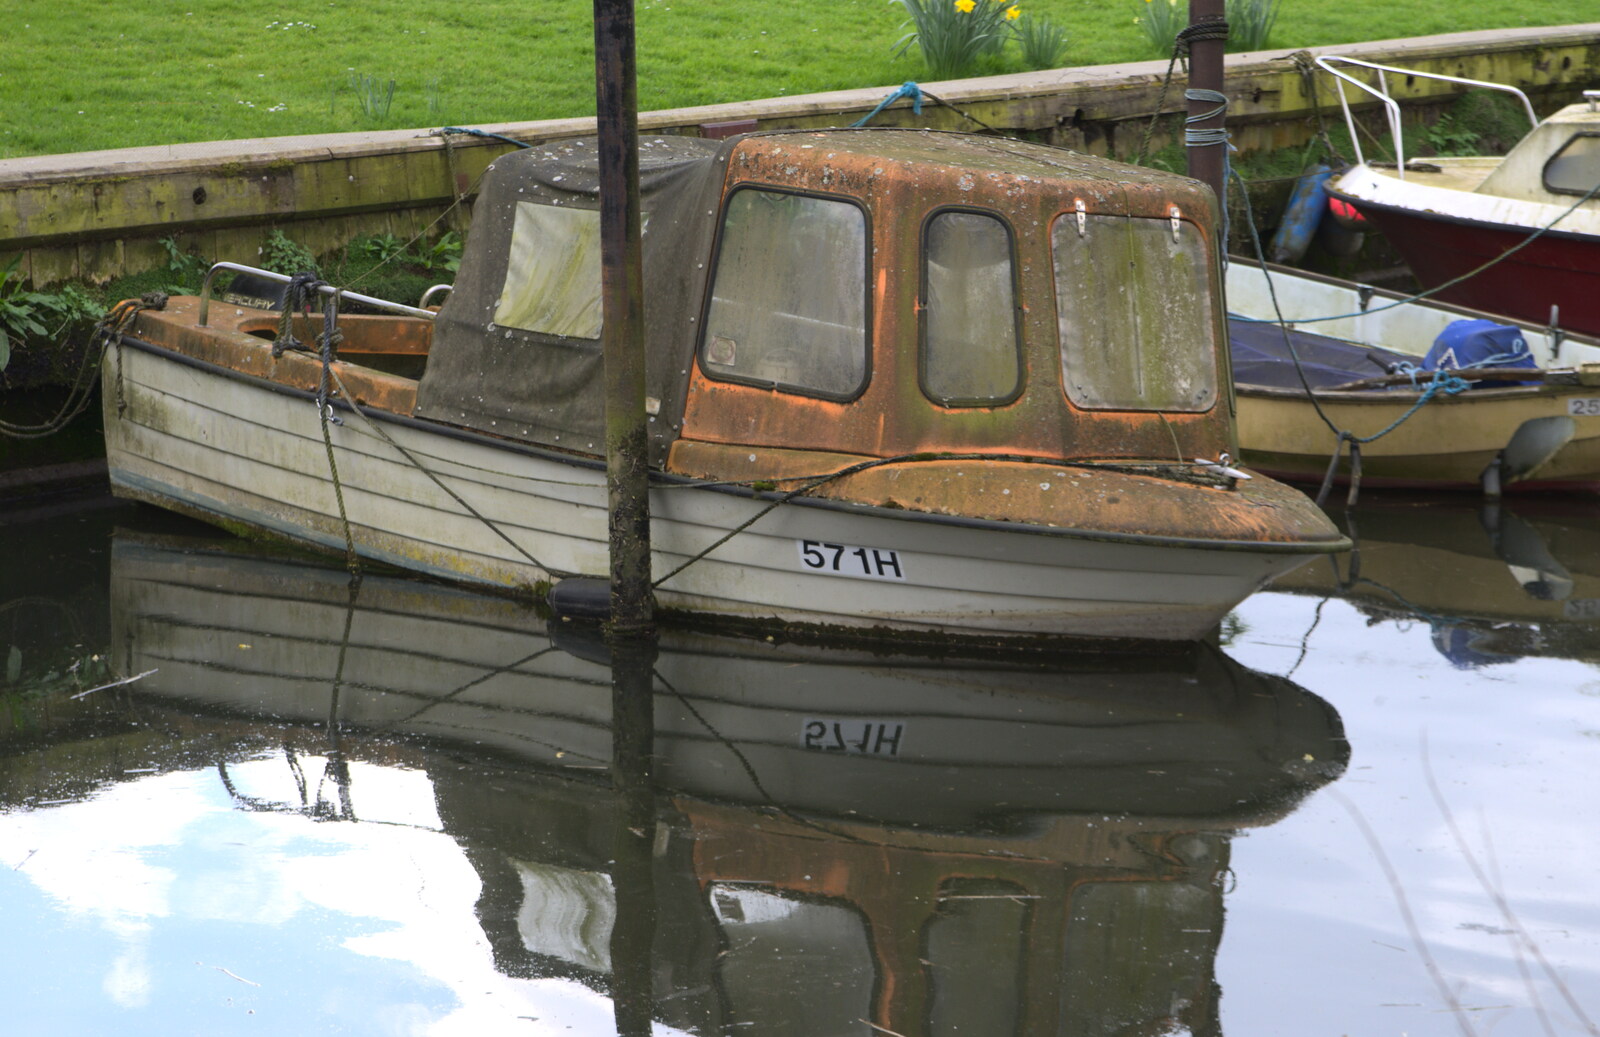 A sad-looking boat from A Postcard from Beccles, Suffolk - 2nd April 2017